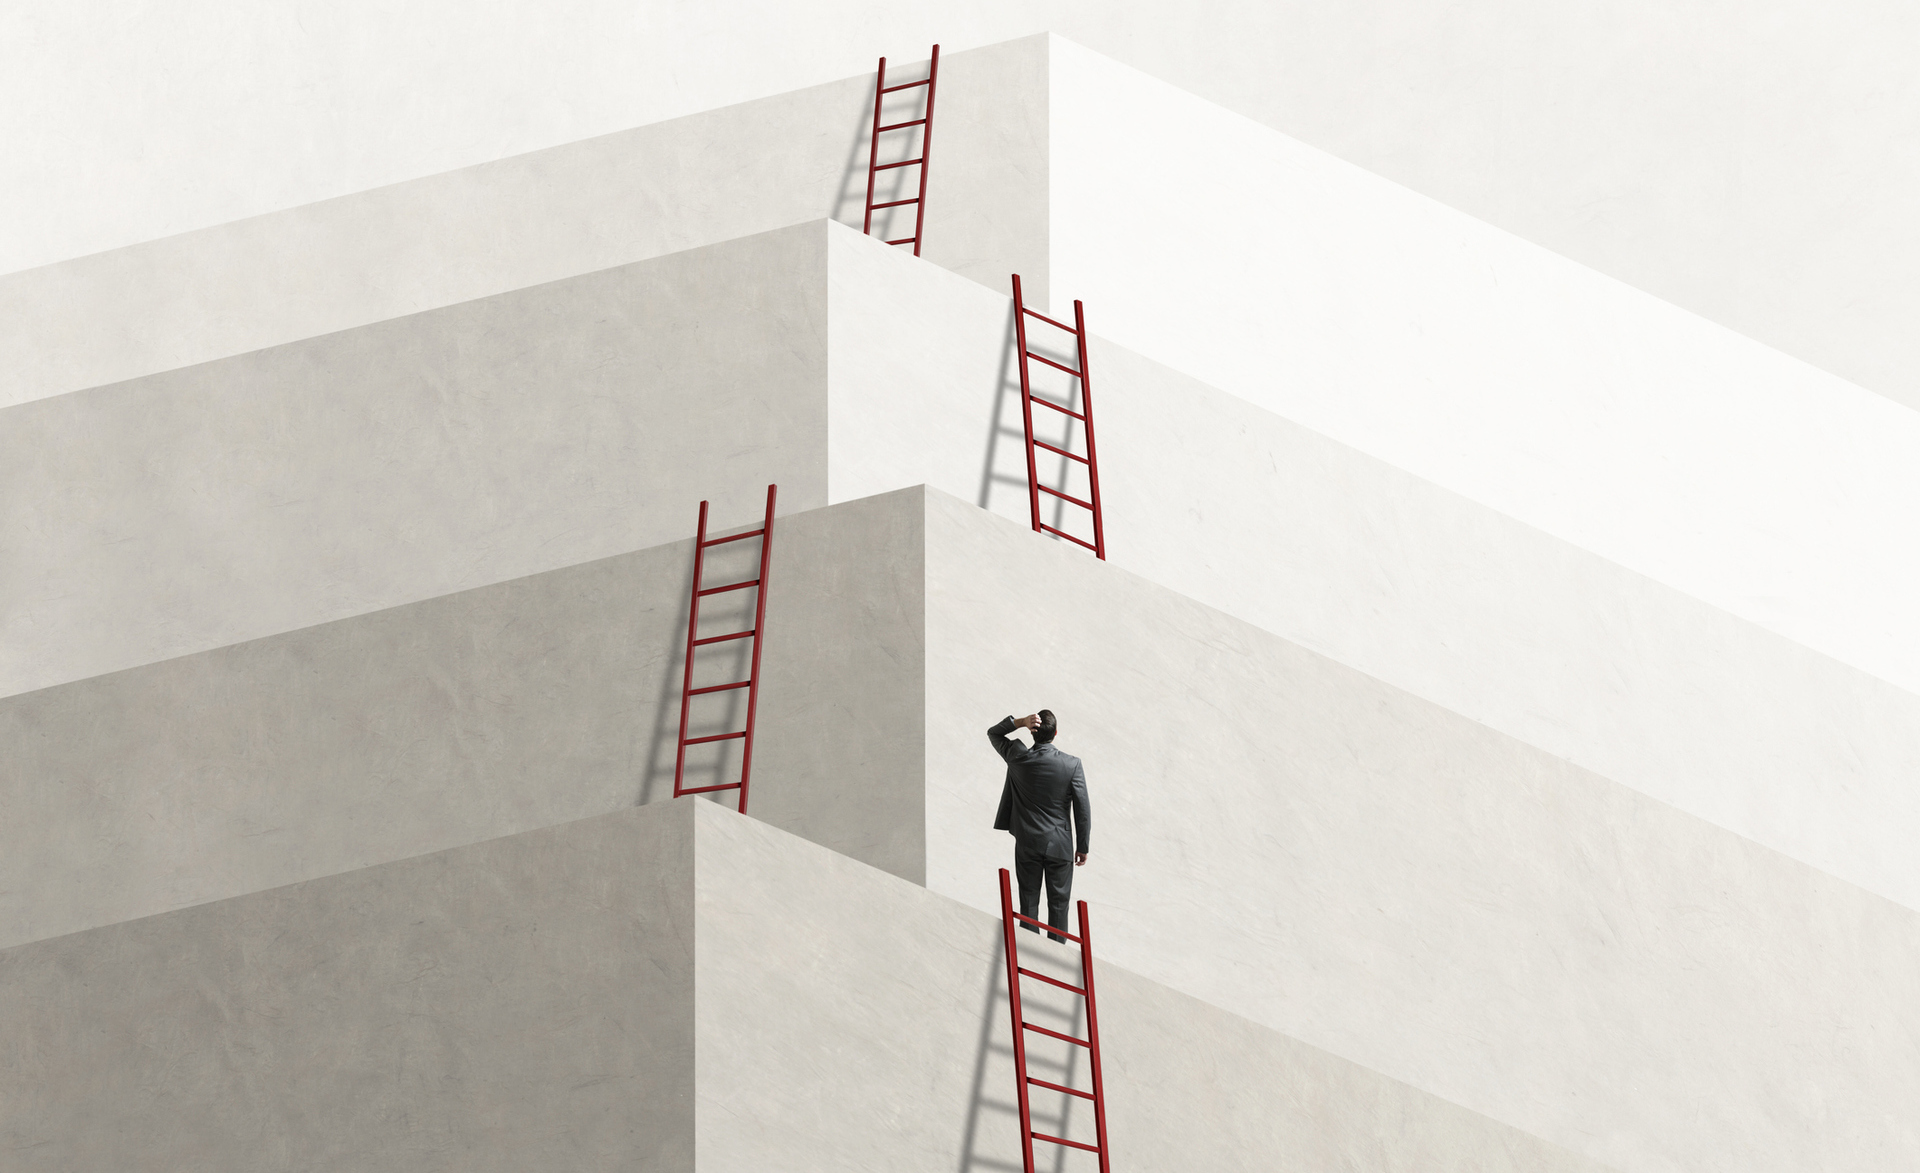 A person stood at the bottom level evaluating the next steps to the nearest ladder